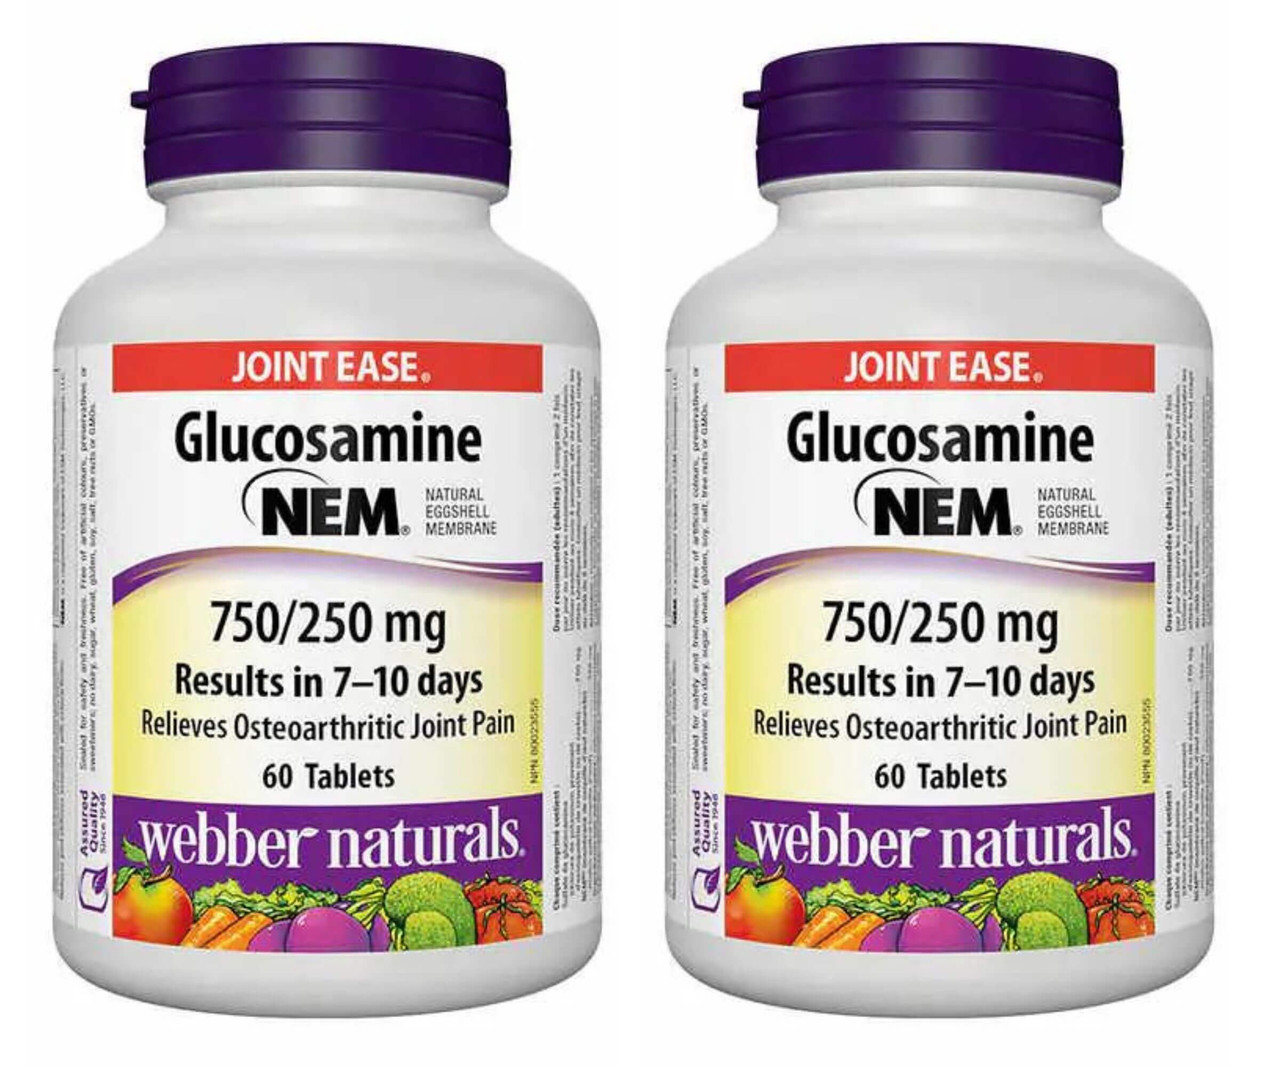 Webber Naturals Glucosamine with NEM® Natural Eggshell Membrane 750/250 mg - 2 x 60 Tablets | Comprehensive Joint Support-Chicken Pieces